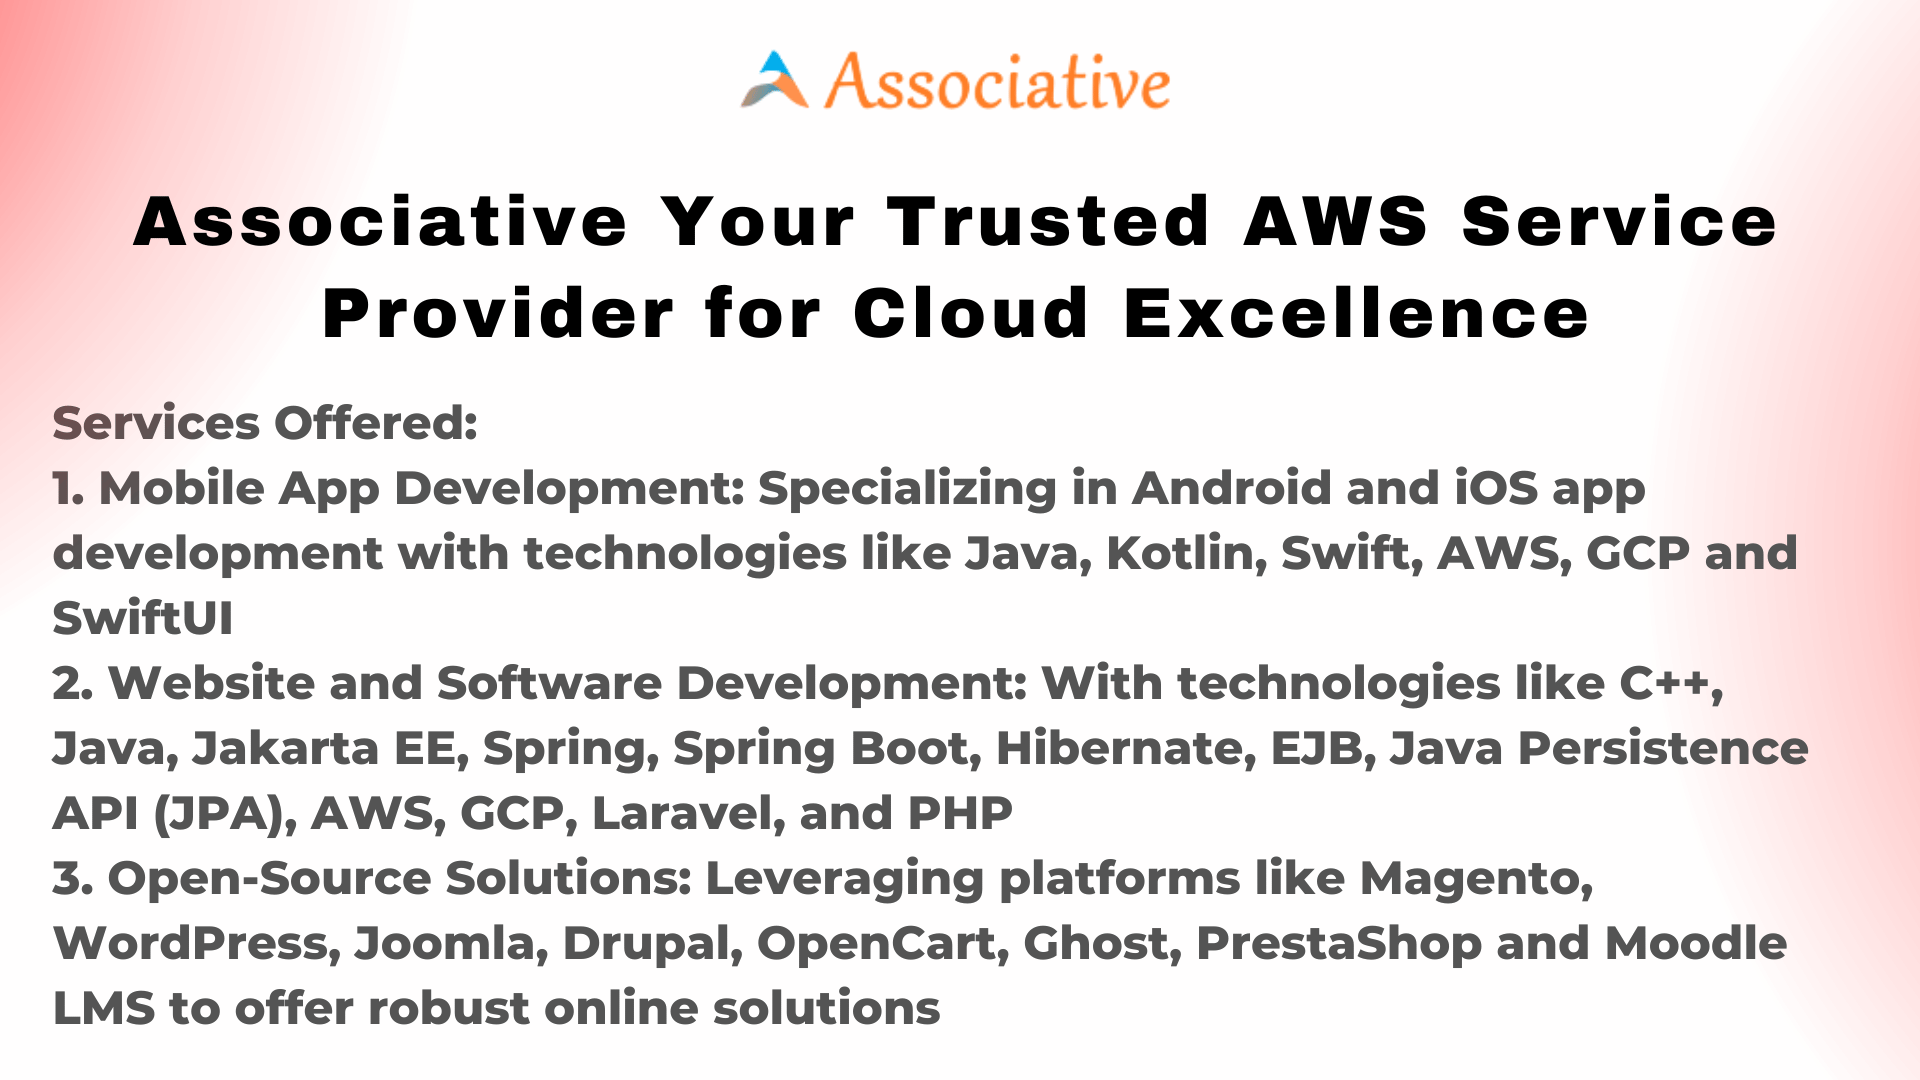 Associative Your Trusted AWS Service Provider for Cloud Excellence